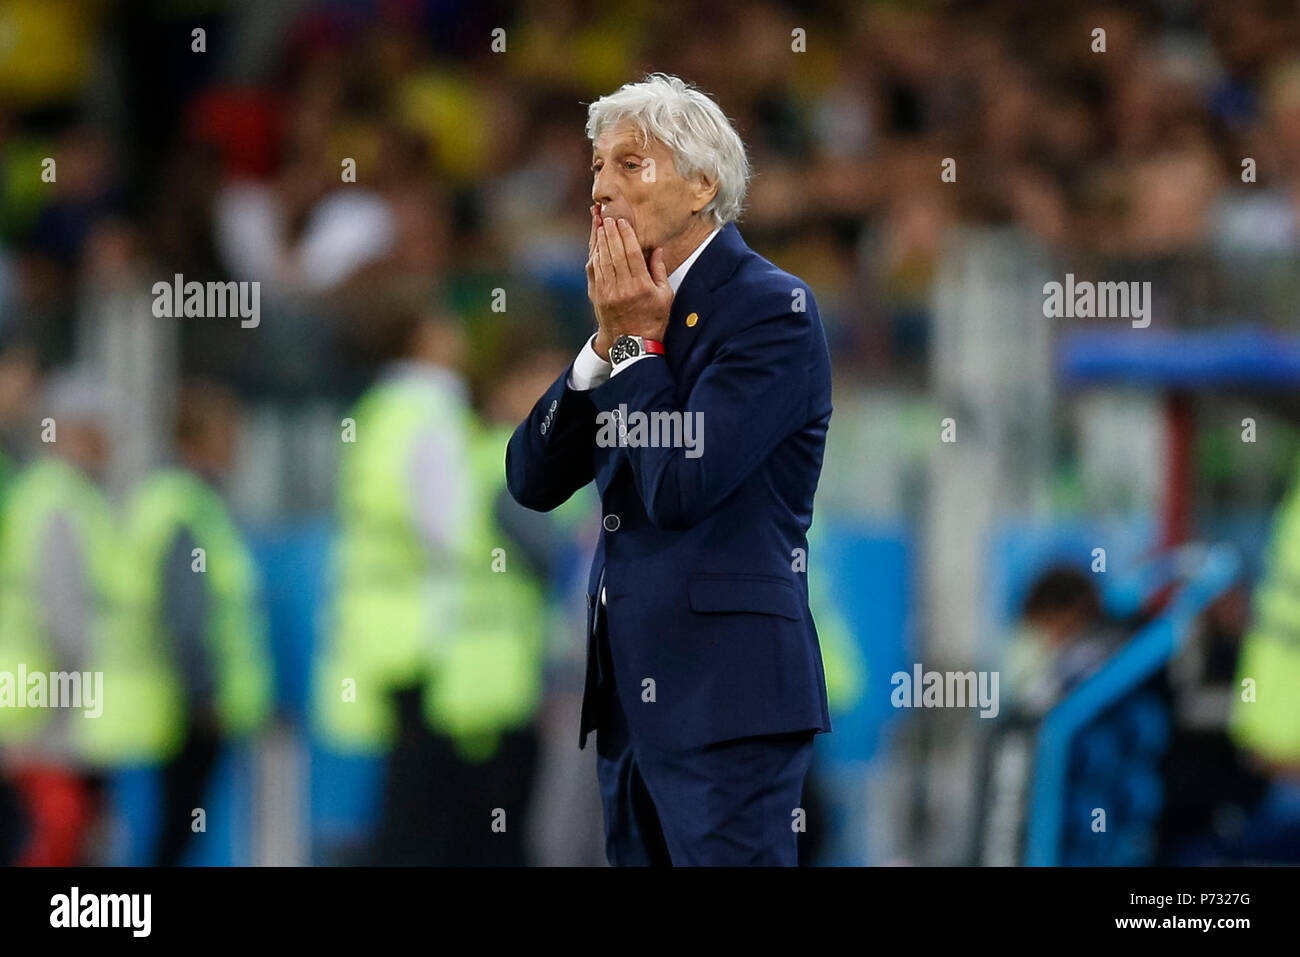 Moscow, Russia. 3rd July, 2018. Colombia Manager Jose Pekerman looks dejected during the 2018 FIFA World Cup Round of 16 match between Colombia and England at Spartak Stadium on July 3rd 2018 in Moscow, Russia.Credit: PHC Images/Alamy Live News Stock Photo